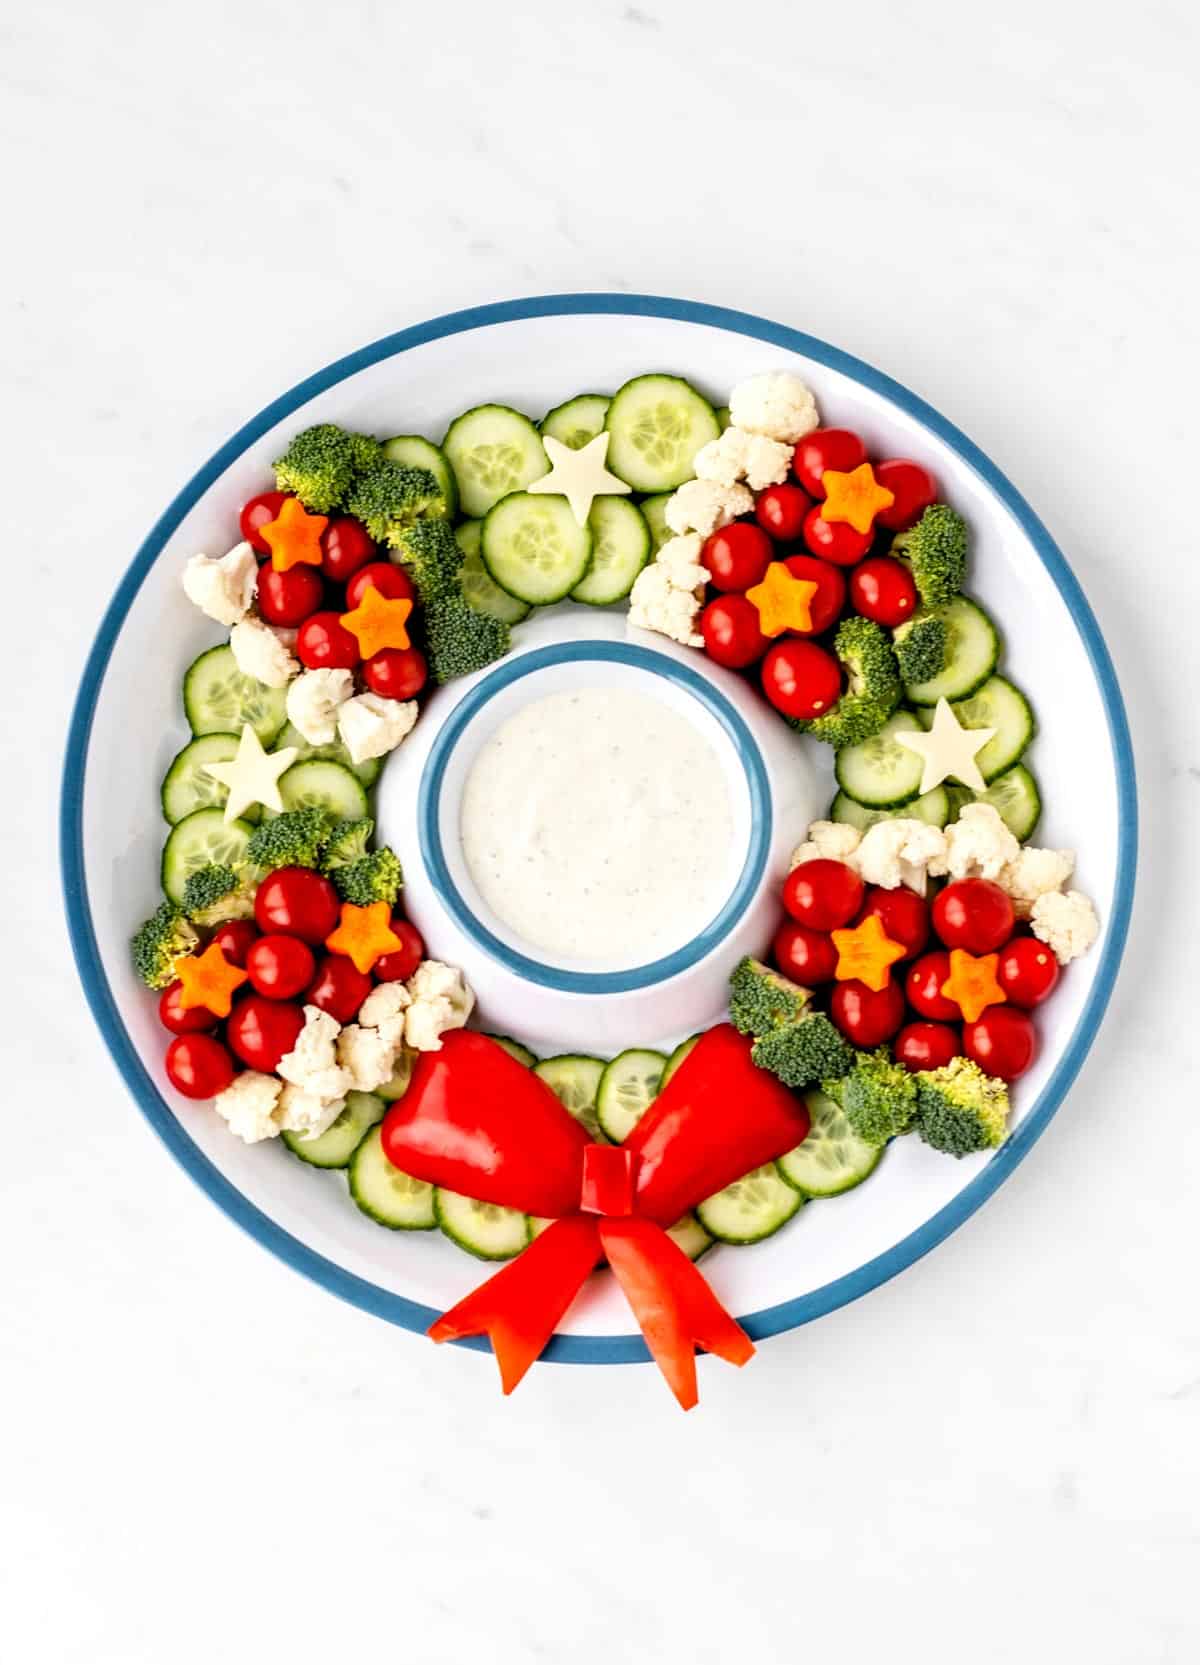 Birds-eye view of the Christmas wreath veggie tray with bell pepper bow and the dip in the center.